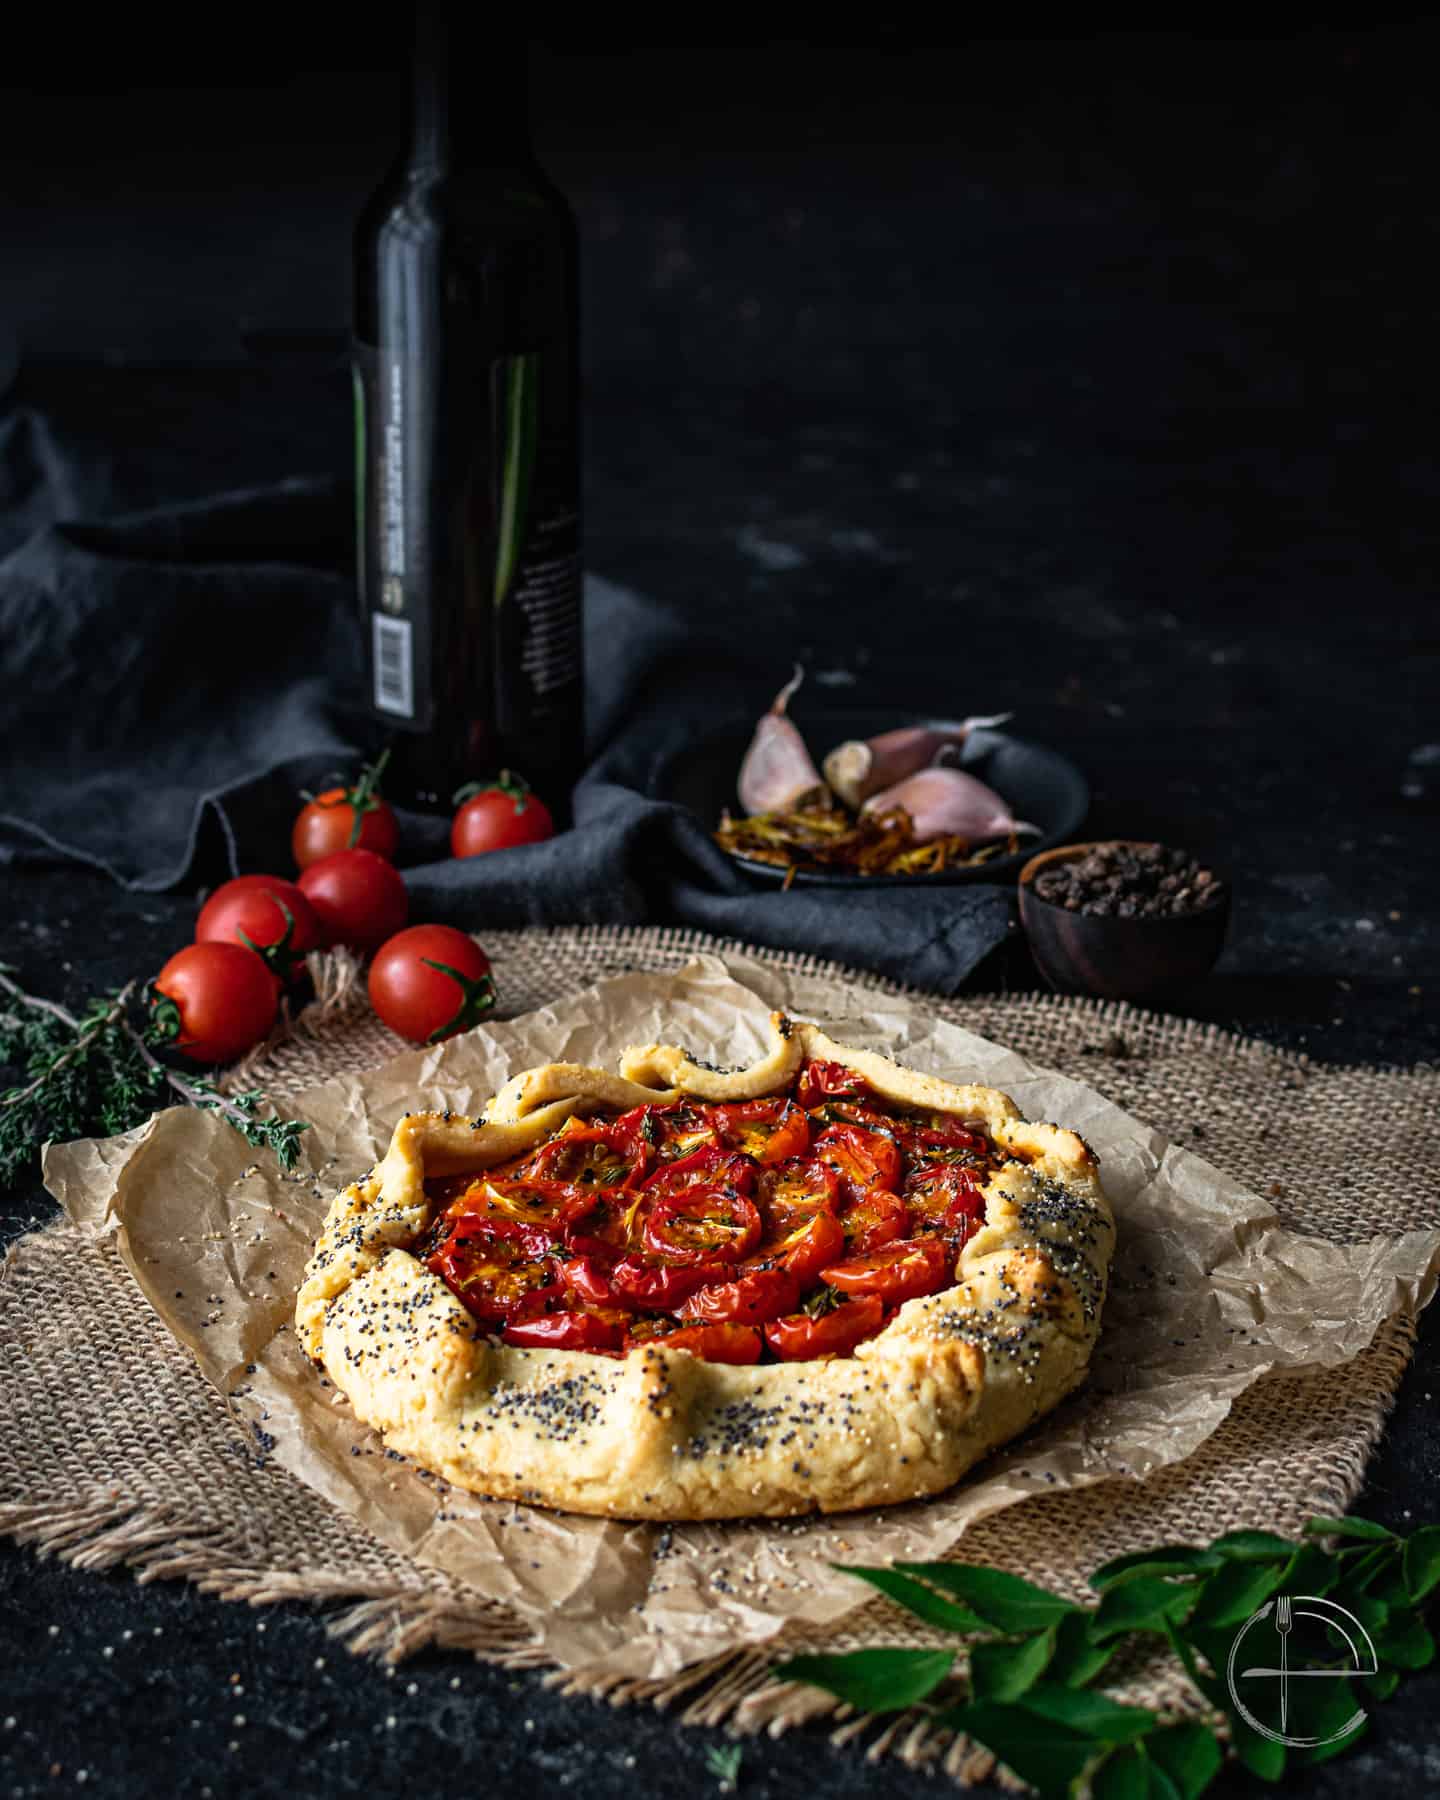 https://everpeckish.com/wp-content/uploads/2020/08/everpeckish_rougaille-inspired-tomato-galette_1.jpg